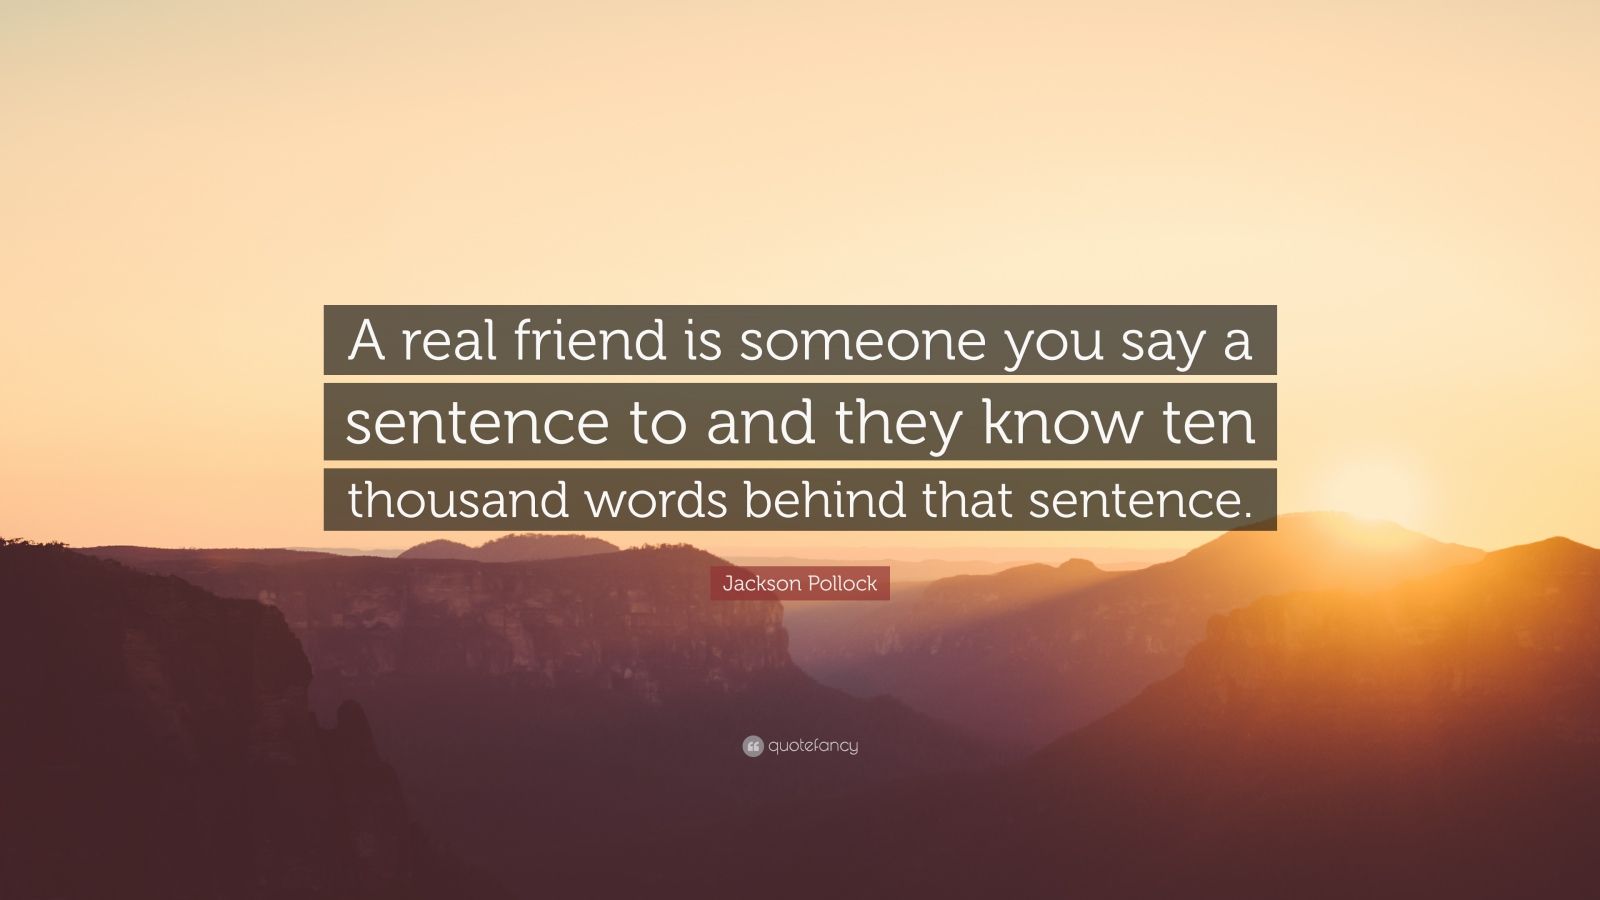 Jackson Pollock Quote A Real Friend Is Someone You Say A Sentence To And They Know Ten Thousand Words Behind That Sentence 7 Wallpapers Quotefancy